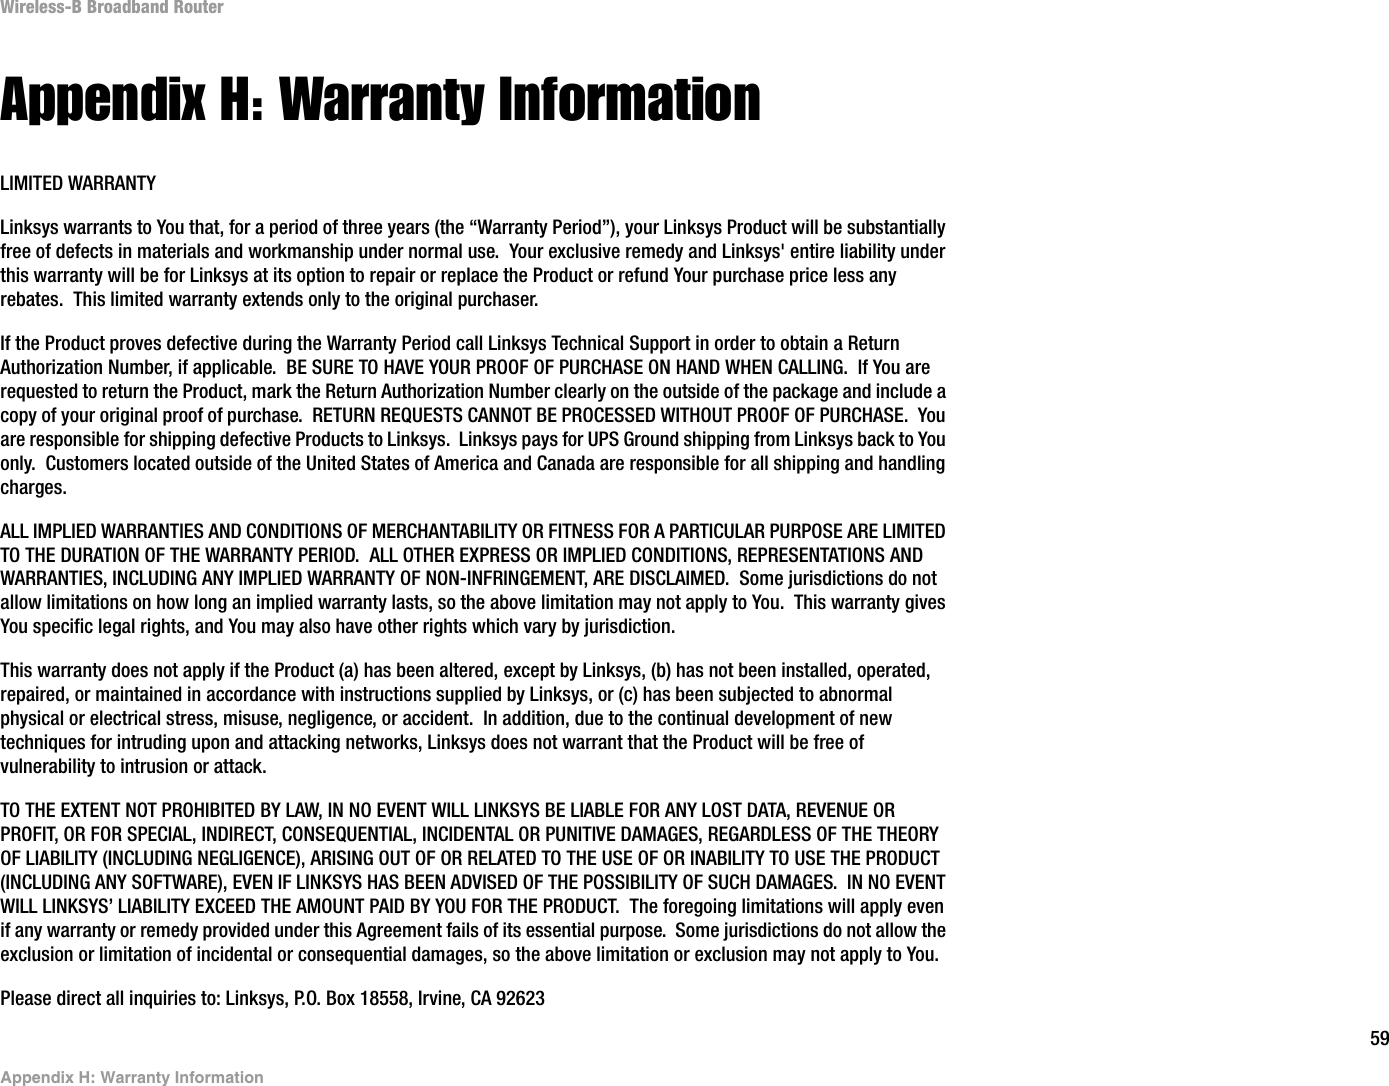 59Appendix H: Warranty InformationWireless-B Broadband RouterAppendix H: Warranty InformationLIMITED WARRANTYLinksys warrants to You that, for a period of three years (the “Warranty Period”), your Linksys Product will be substantially free of defects in materials and workmanship under normal use.  Your exclusive remedy and Linksys&apos; entire liability under this warranty will be for Linksys at its option to repair or replace the Product or refund Your purchase price less any rebates.  This limited warranty extends only to the original purchaser.  If the Product proves defective during the Warranty Period call Linksys Technical Support in order to obtain a Return Authorization Number, if applicable.  BE SURE TO HAVE YOUR PROOF OF PURCHASE ON HAND WHEN CALLING.  If You are requested to return the Product, mark the Return Authorization Number clearly on the outside of the package and include a copy of your original proof of purchase.  RETURN REQUESTS CANNOT BE PROCESSED WITHOUT PROOF OF PURCHASE.  You are responsible for shipping defective Products to Linksys.  Linksys pays for UPS Ground shipping from Linksys back to You only.  Customers located outside of the United States of America and Canada are responsible for all shipping and handling charges. ALL IMPLIED WARRANTIES AND CONDITIONS OF MERCHANTABILITY OR FITNESS FOR A PARTICULAR PURPOSE ARE LIMITED TO THE DURATION OF THE WARRANTY PERIOD.  ALL OTHER EXPRESS OR IMPLIED CONDITIONS, REPRESENTATIONS AND WARRANTIES, INCLUDING ANY IMPLIED WARRANTY OF NON-INFRINGEMENT, ARE DISCLAIMED.  Some jurisdictions do not allow limitations on how long an implied warranty lasts, so the above limitation may not apply to You.  This warranty gives You specific legal rights, and You may also have other rights which vary by jurisdiction.This warranty does not apply if the Product (a) has been altered, except by Linksys, (b) has not been installed, operated, repaired, or maintained in accordance with instructions supplied by Linksys, or (c) has been subjected to abnormal physical or electrical stress, misuse, negligence, or accident.  In addition, due to the continual development of new techniques for intruding upon and attacking networks, Linksys does not warrant that the Product will be free of vulnerability to intrusion or attack.TO THE EXTENT NOT PROHIBITED BY LAW, IN NO EVENT WILL LINKSYS BE LIABLE FOR ANY LOST DATA, REVENUE OR PROFIT, OR FOR SPECIAL, INDIRECT, CONSEQUENTIAL, INCIDENTAL OR PUNITIVE DAMAGES, REGARDLESS OF THE THEORY OF LIABILITY (INCLUDING NEGLIGENCE), ARISING OUT OF OR RELATED TO THE USE OF OR INABILITY TO USE THE PRODUCT (INCLUDING ANY SOFTWARE), EVEN IF LINKSYS HAS BEEN ADVISED OF THE POSSIBILITY OF SUCH DAMAGES.  IN NO EVENT WILL LINKSYS’ LIABILITY EXCEED THE AMOUNT PAID BY YOU FOR THE PRODUCT.  The foregoing limitations will apply even if any warranty or remedy provided under this Agreement fails of its essential purpose.  Some jurisdictions do not allow the exclusion or limitation of incidental or consequential damages, so the above limitation or exclusion may not apply to You.Please direct all inquiries to: Linksys, P.O. Box 18558, Irvine, CA 92623